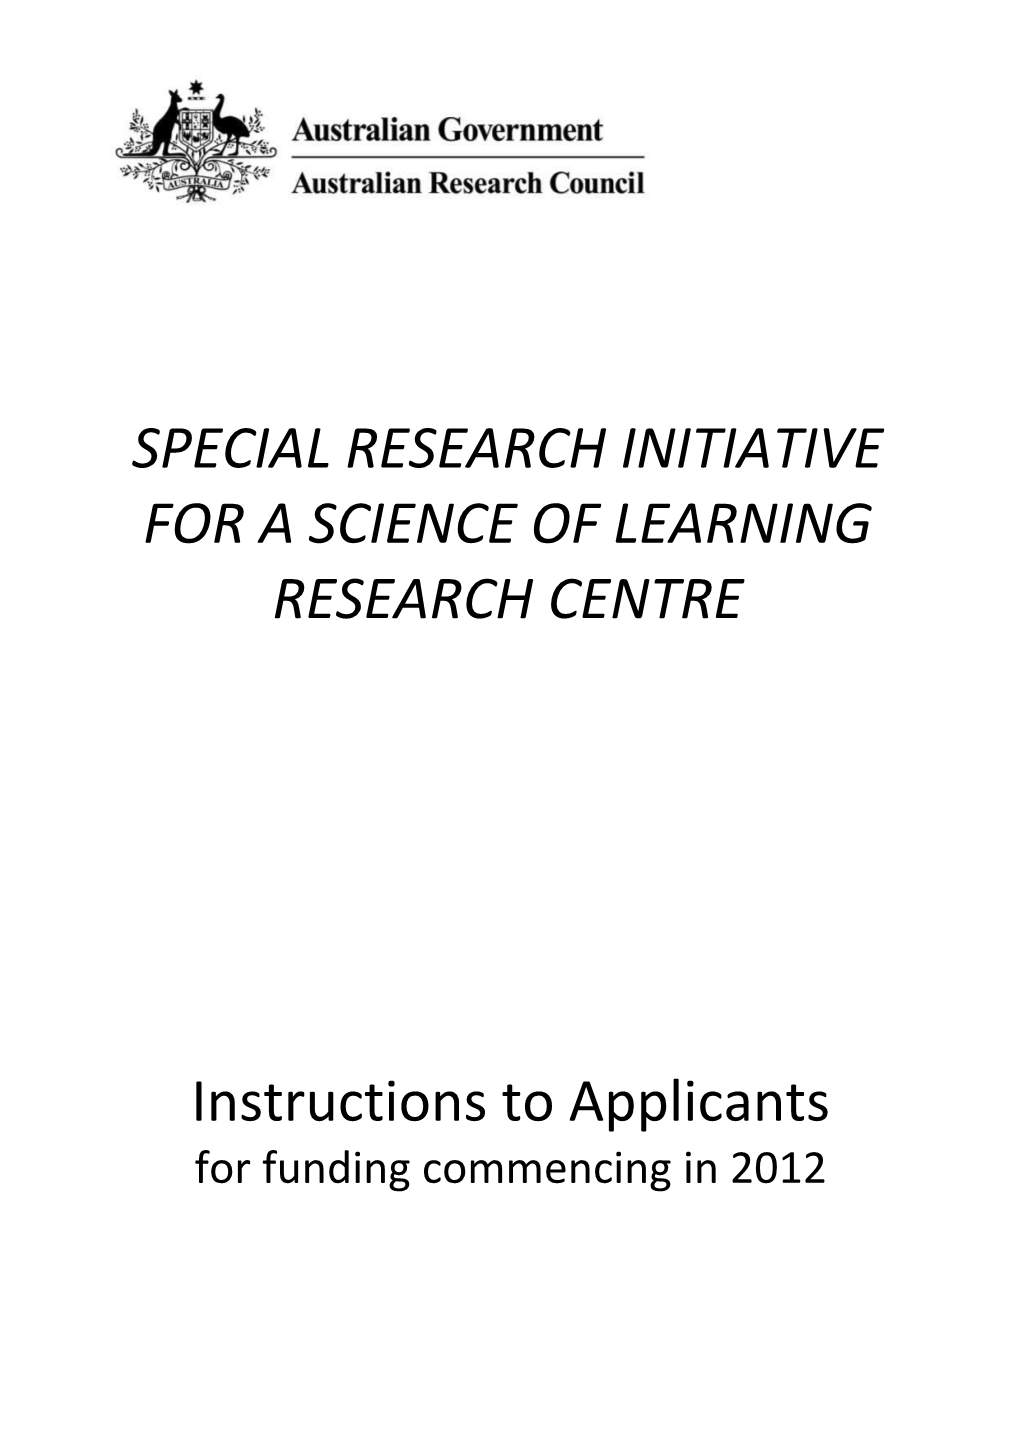 Special Research Initiative for a Science of Learning Research Centre